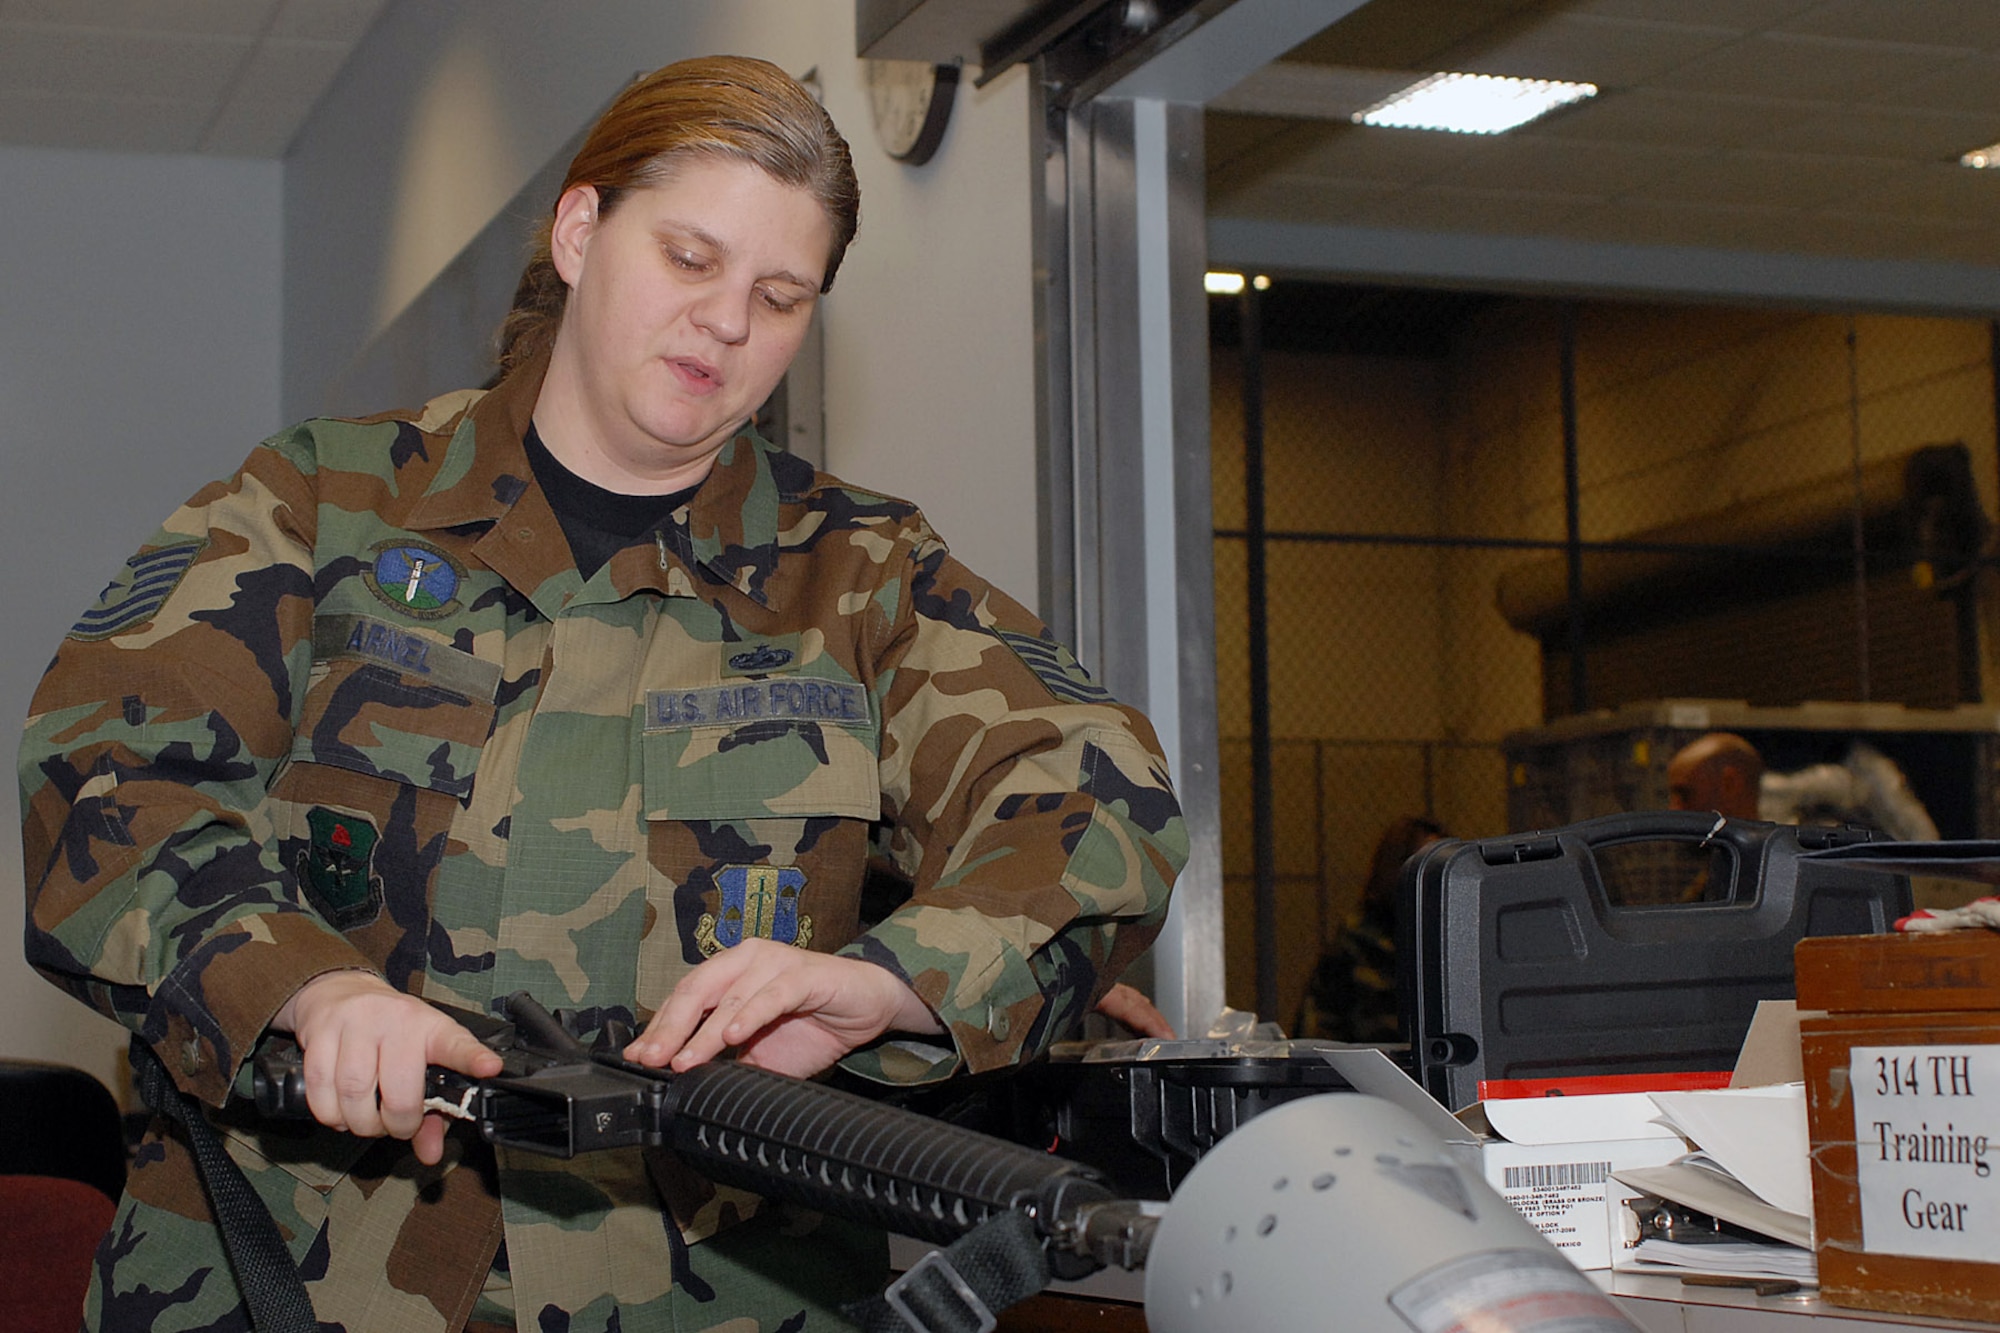 Tech. Sgt. Erin Arnel, 314th Logistics Readiness Squadron, clears an M-16 before issuing it to a deploying troop at Little Rock Air Force BaseJan. 21. The deploying troops were given a final farewell by Brig. Gen. Kip Self, 314th Airlift Wing commander before deploying to the area of responsibility. (Photo by Airman 1st Class Nathan Allen)